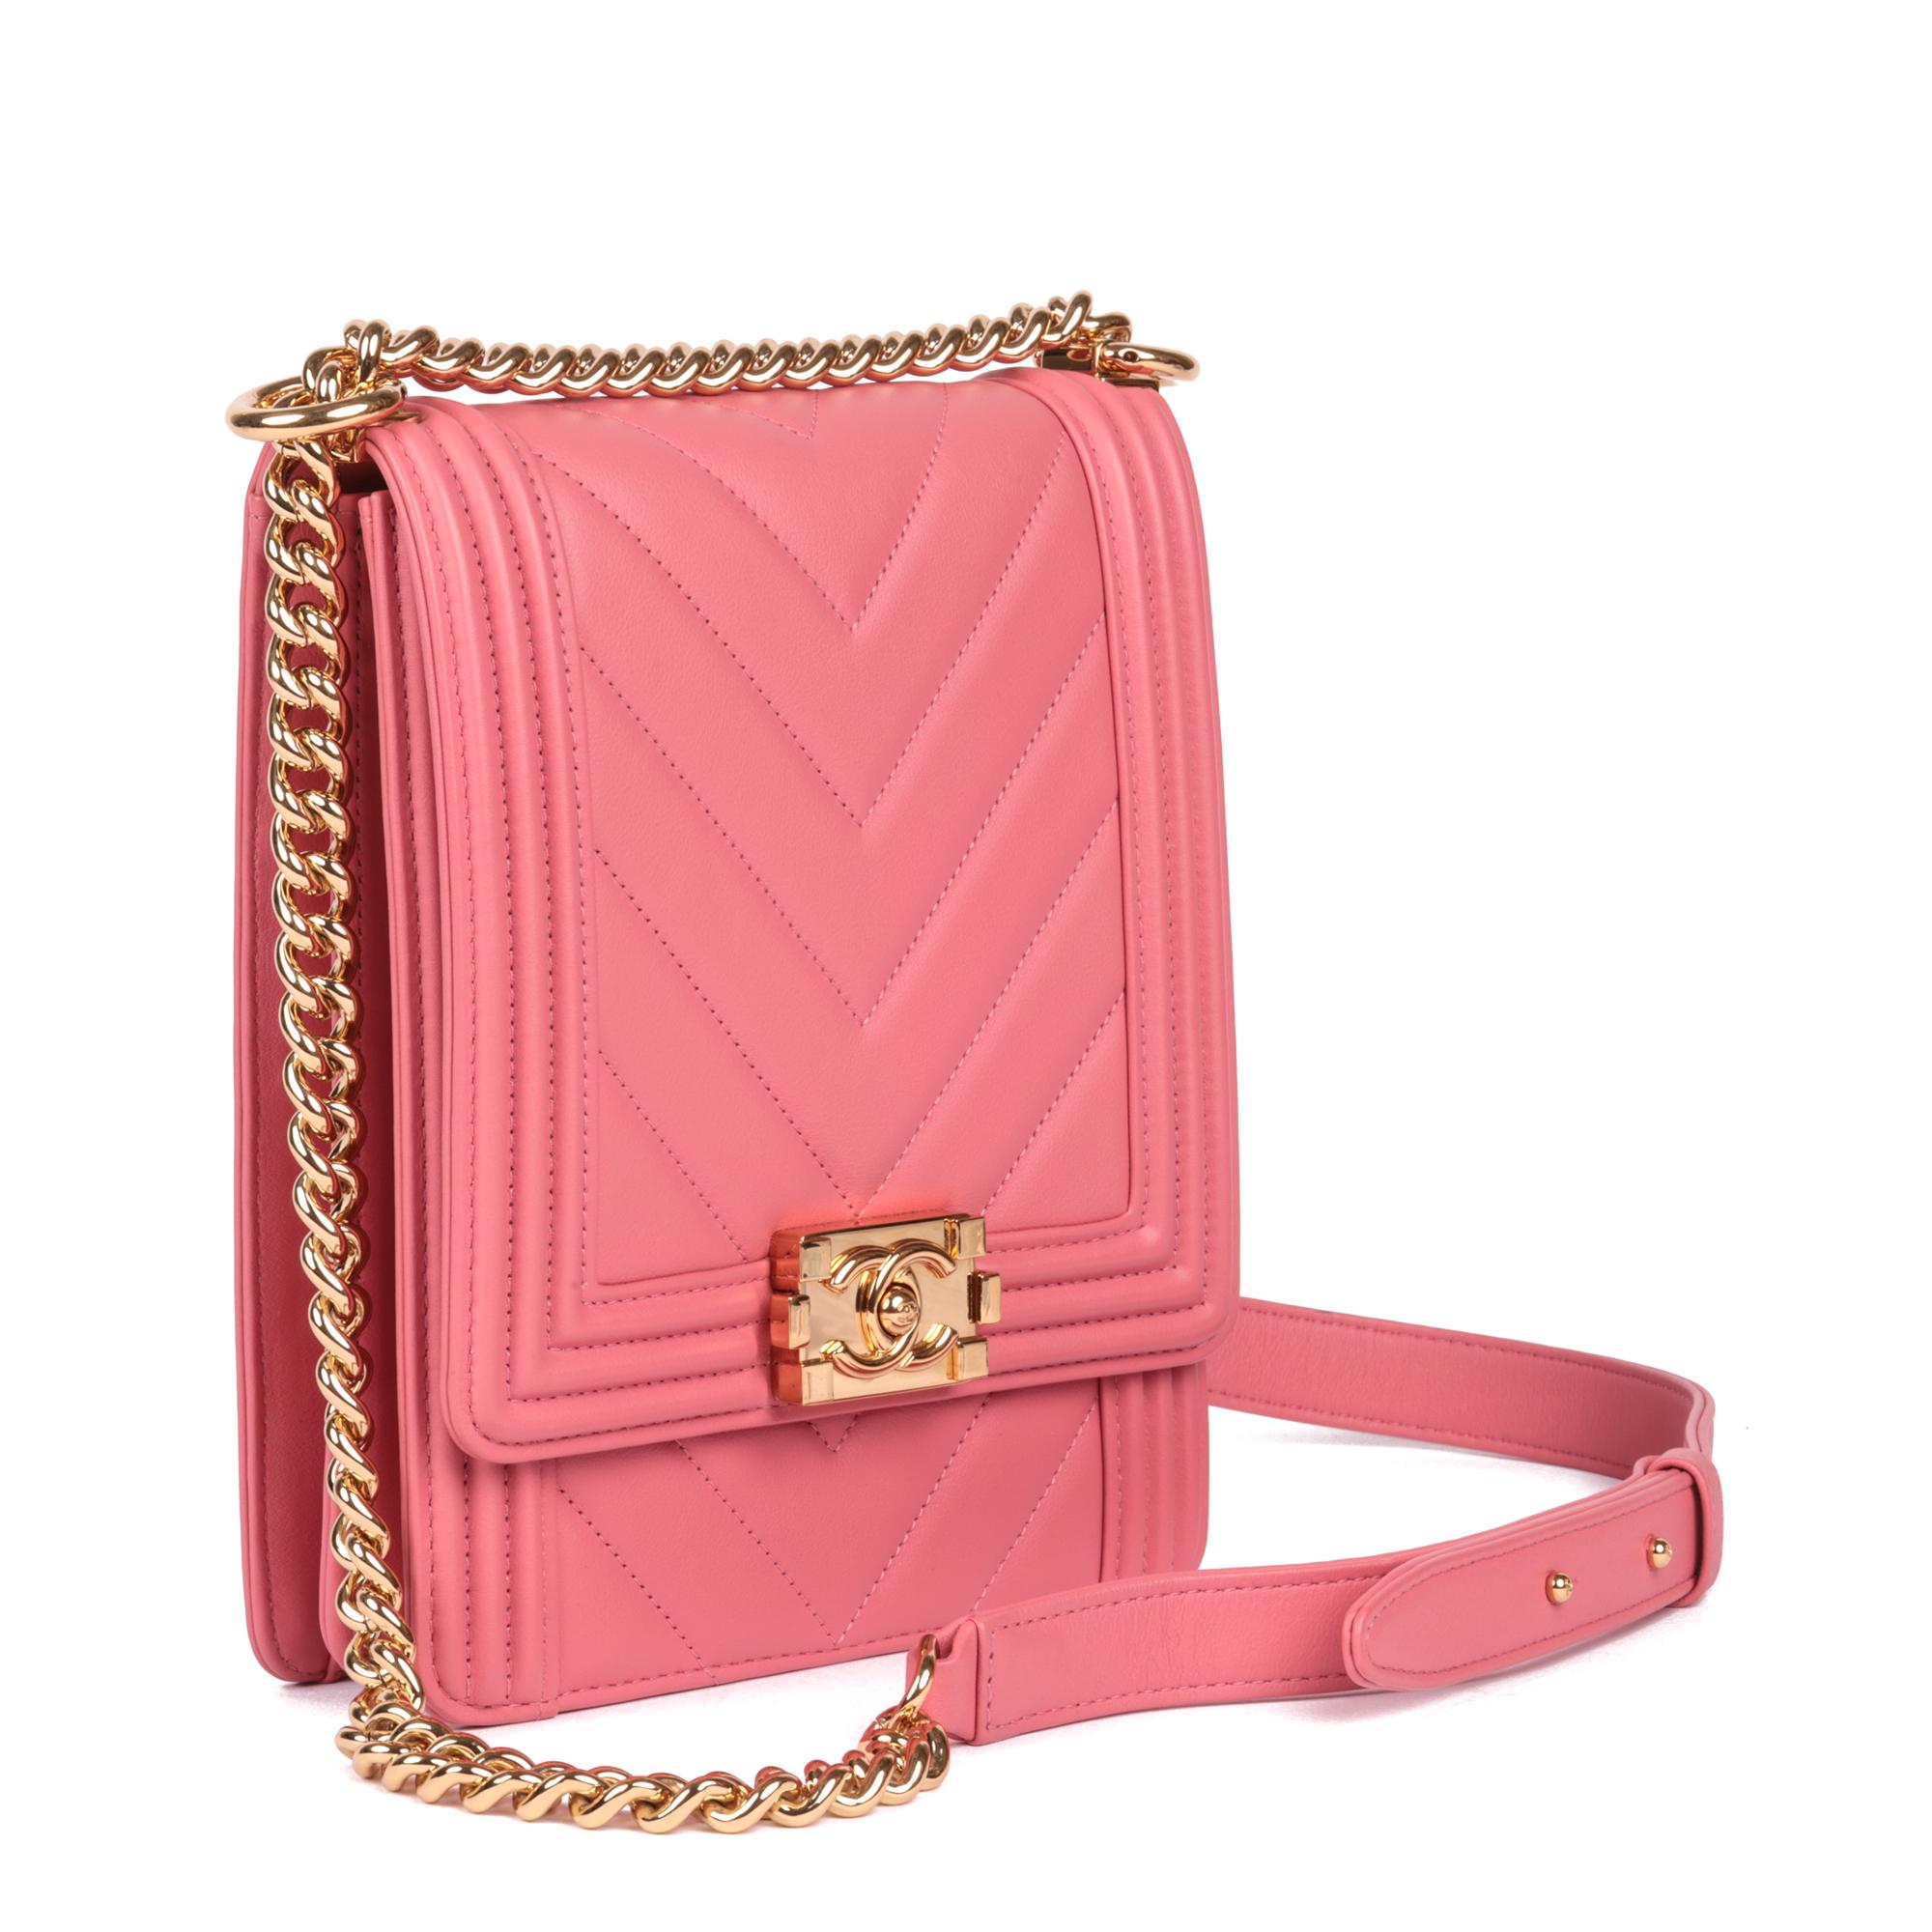 CHANEL
Pink Chevron Quilted Lambskin North-South Le Boy

Serial Number: 28144912
Age (Circa): 2019
Accompanied By: Chanel Dust Bag, Authenticity Card
Authenticity Details:  Authenticity Card, Serial Sticker (Made in Italy)
Gender: Ladies
Type: